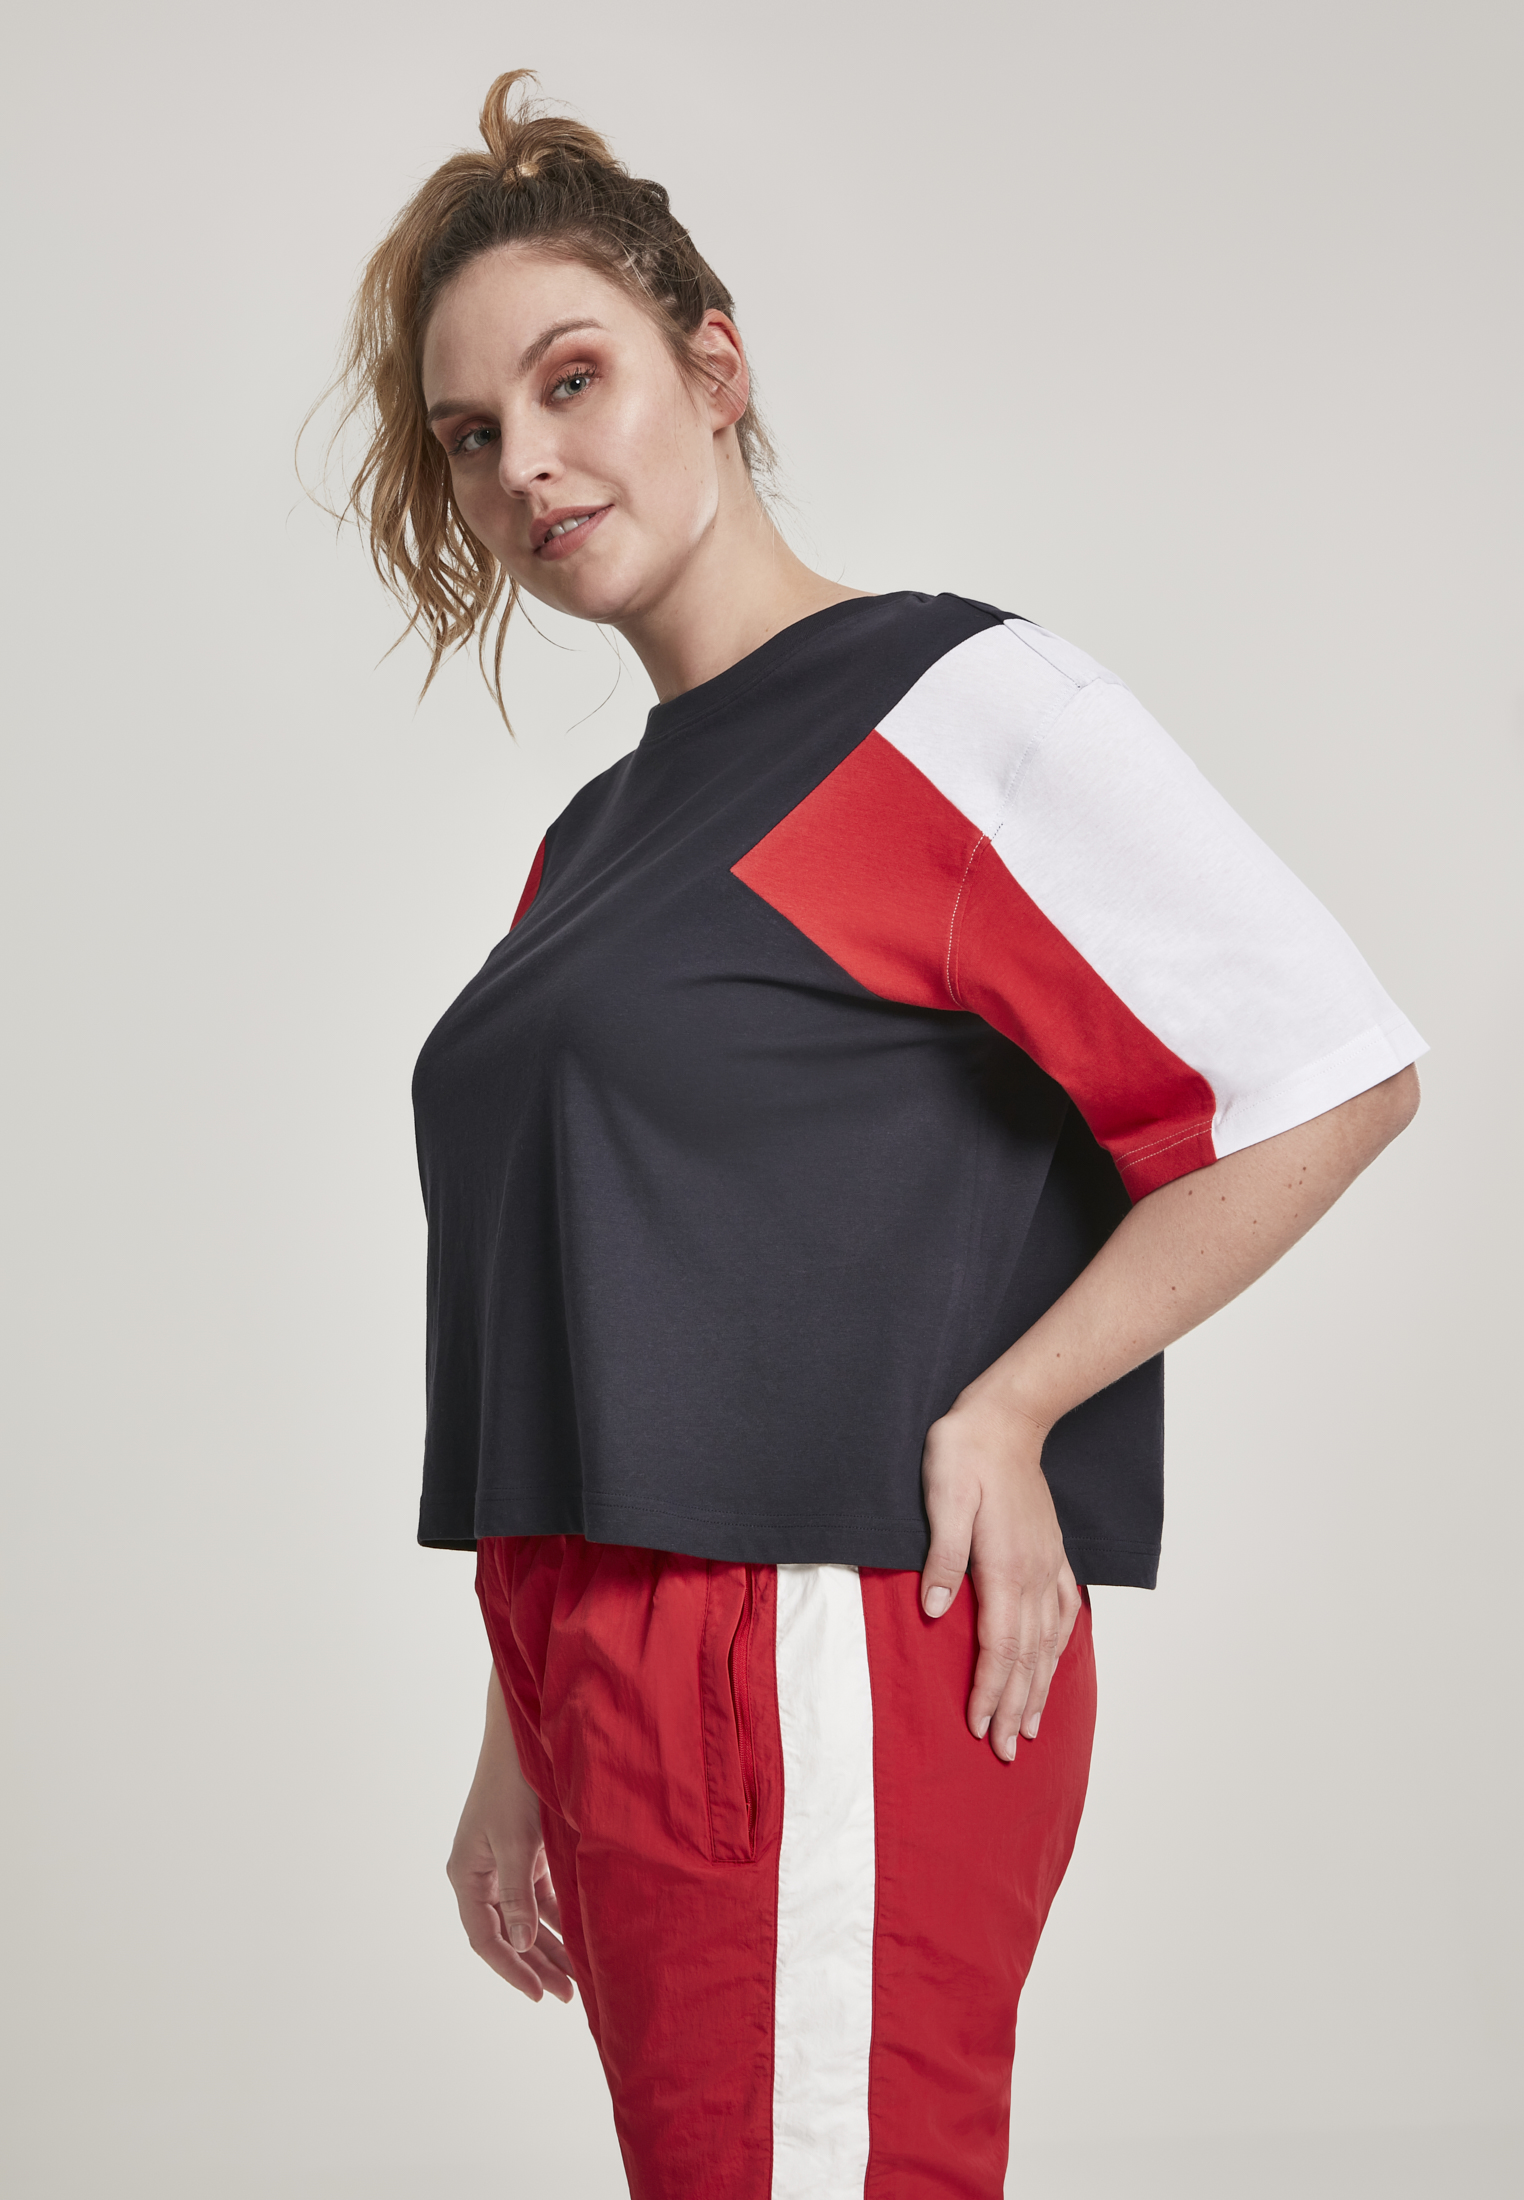 Curvy Ladies 3-Tone Short Oversize Tee in Farbe navy/white/fire red